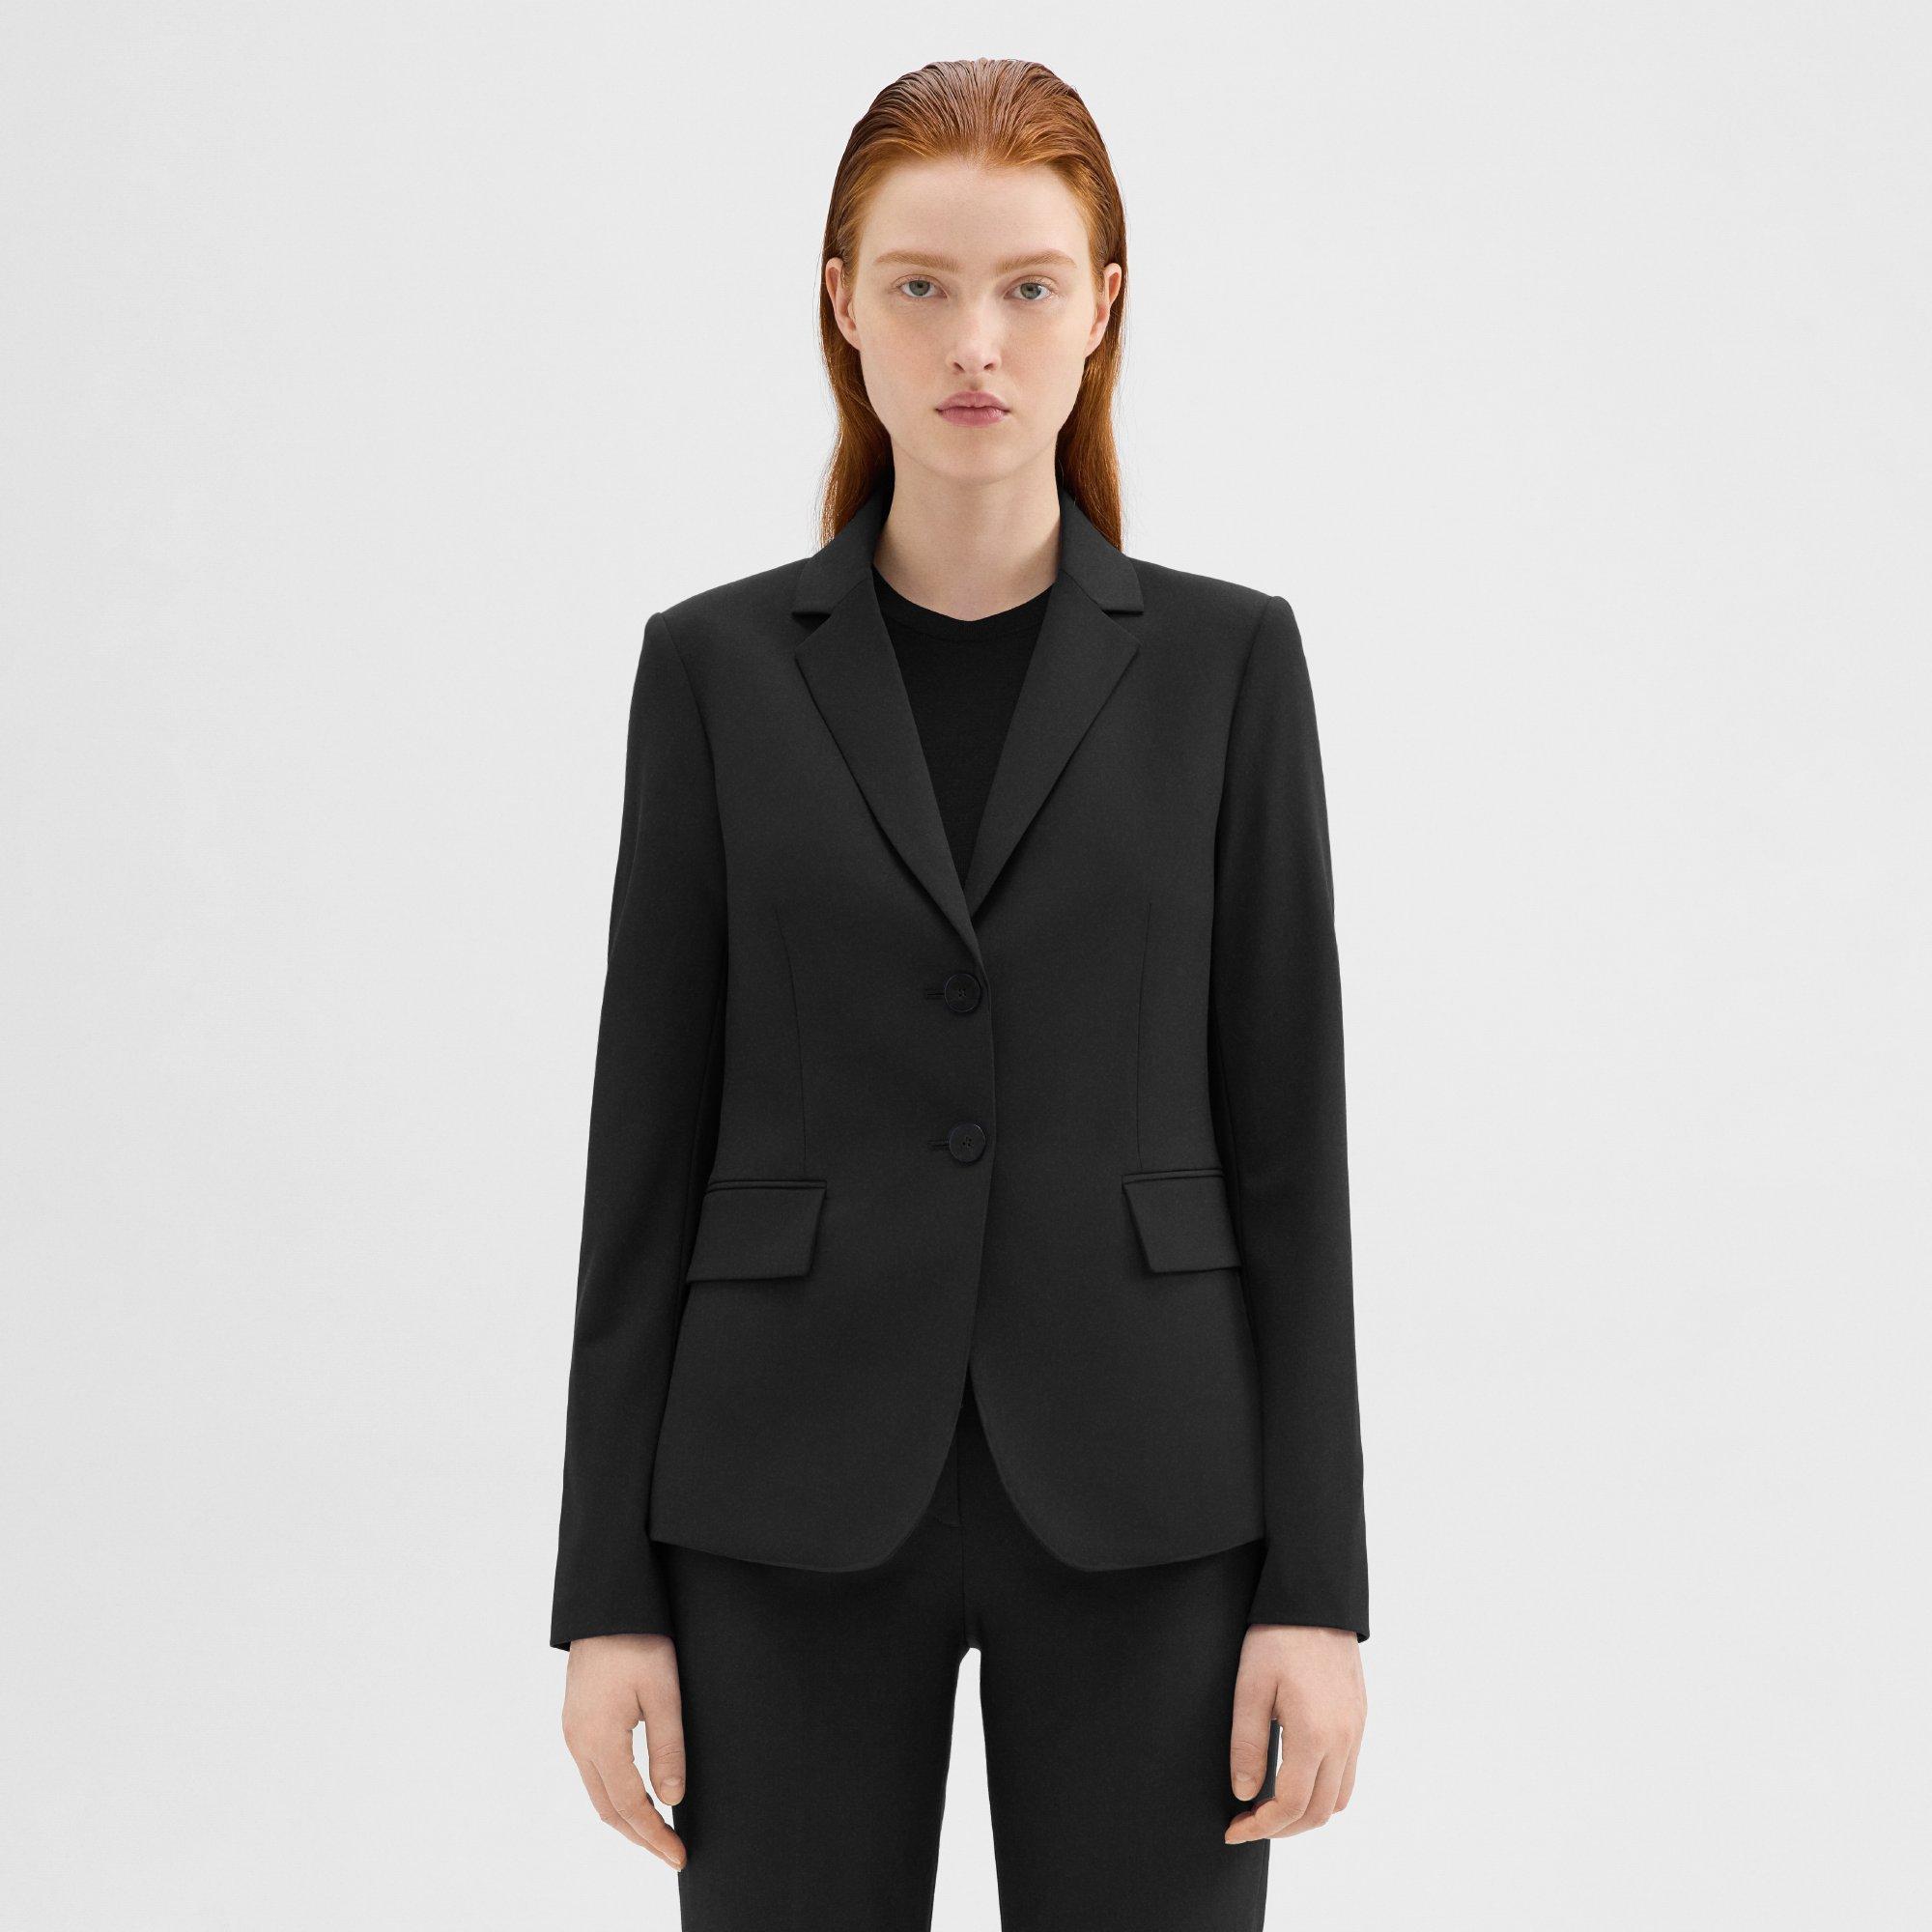 Women's Blazers, Jackets and Vests | Theory